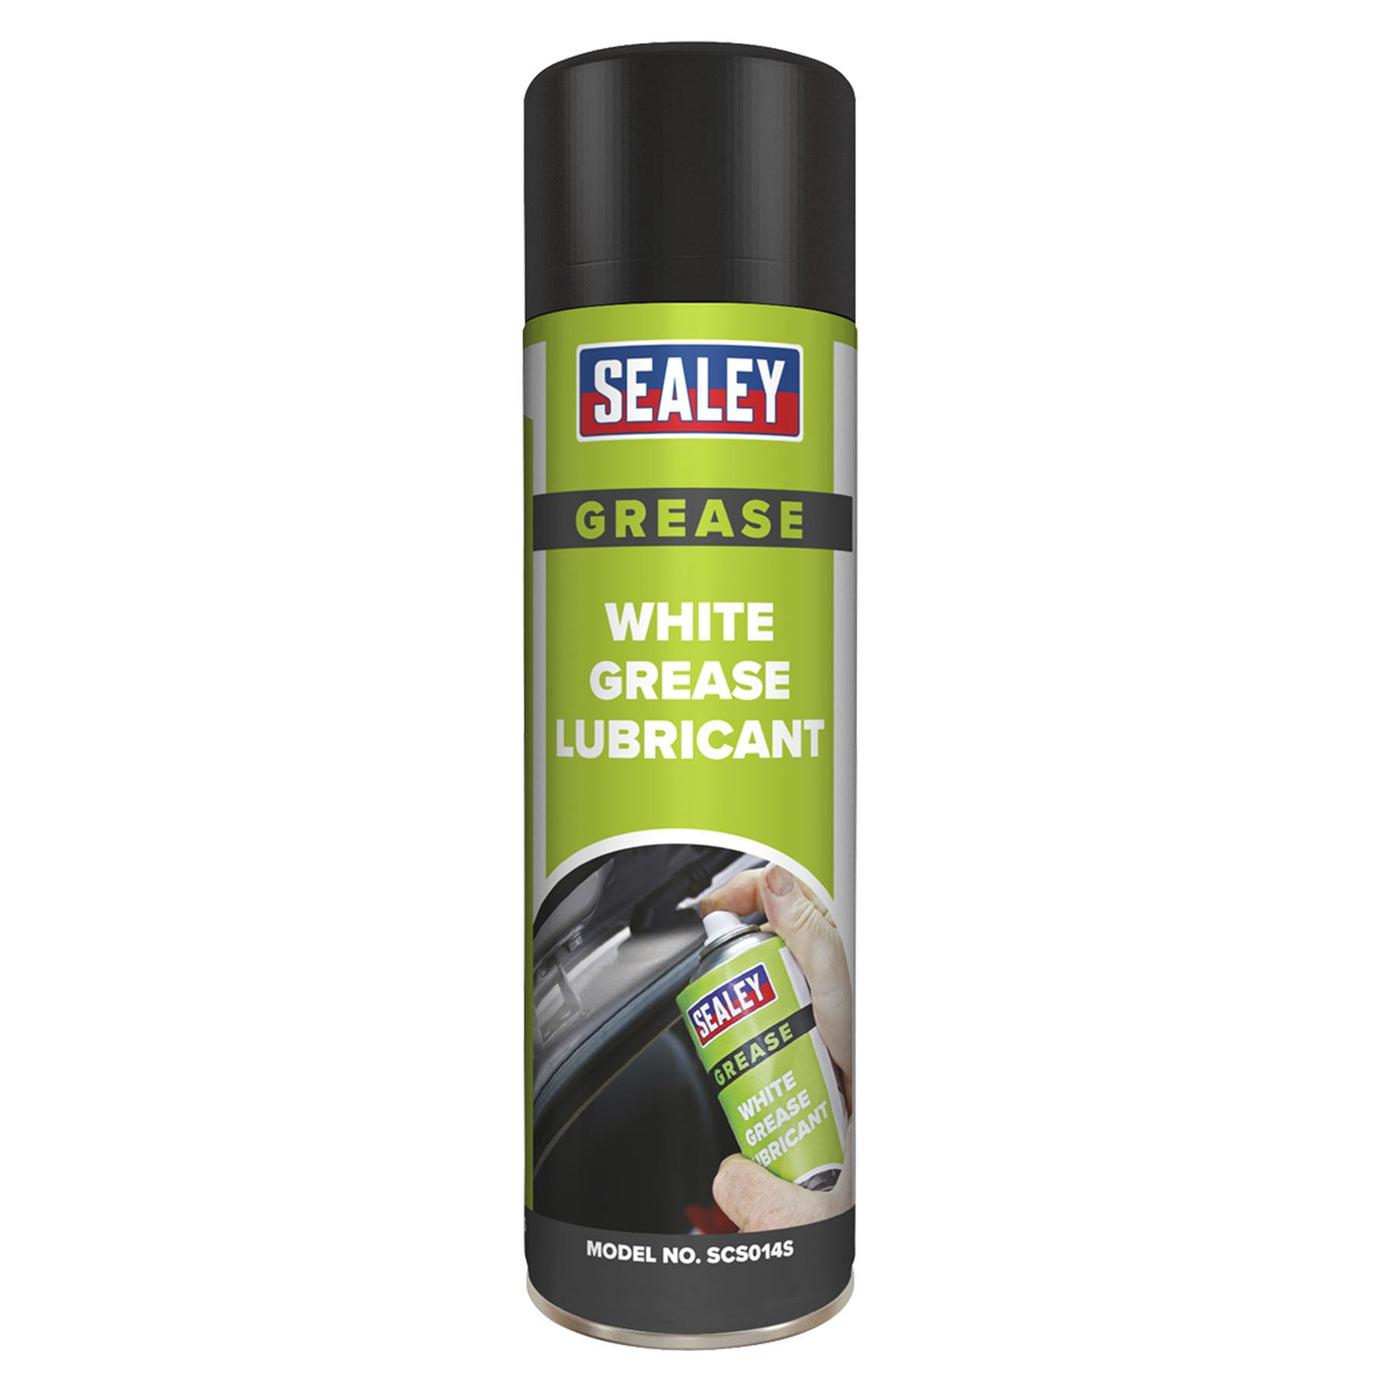 Sealey White Grease Lubricant 500ml Single